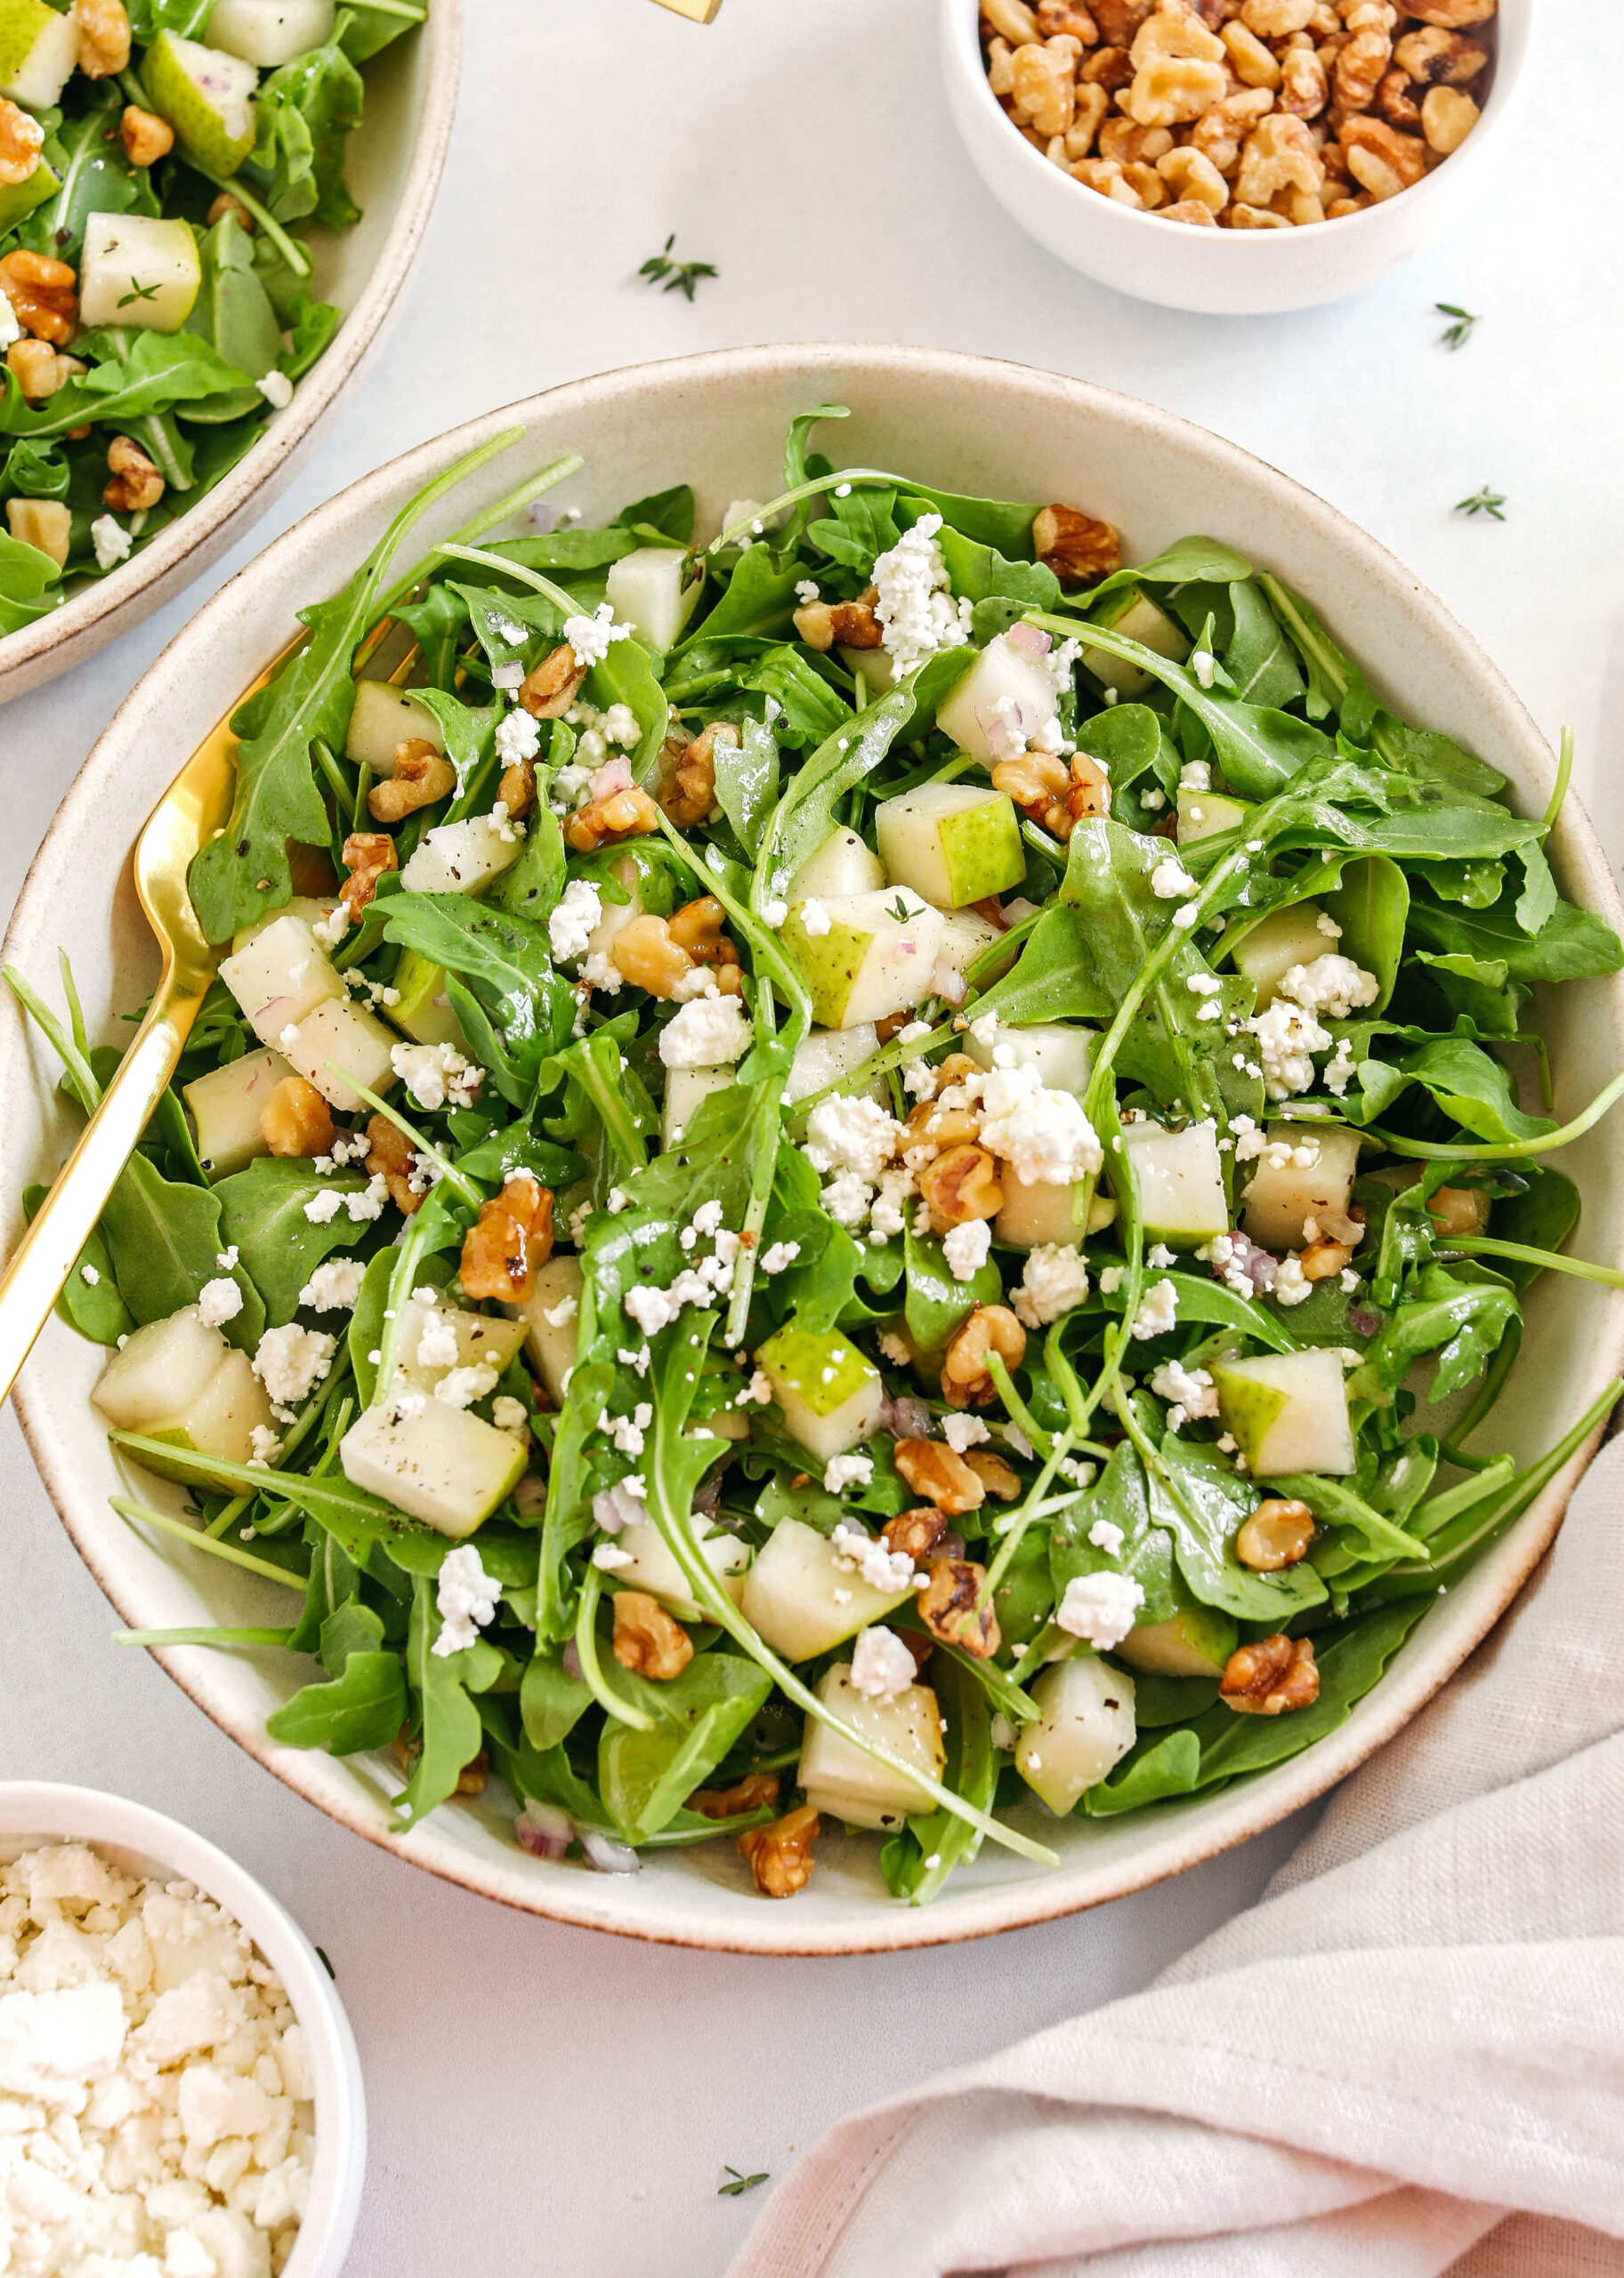 This simple Pear and Arugula Salad is made with fresh arugula, chopped pears, creamy goat cheese and crunchy pecans all tossed with a bright and lemony honey vinaigrette!  The perfect fall salad that is super easy to throw together!